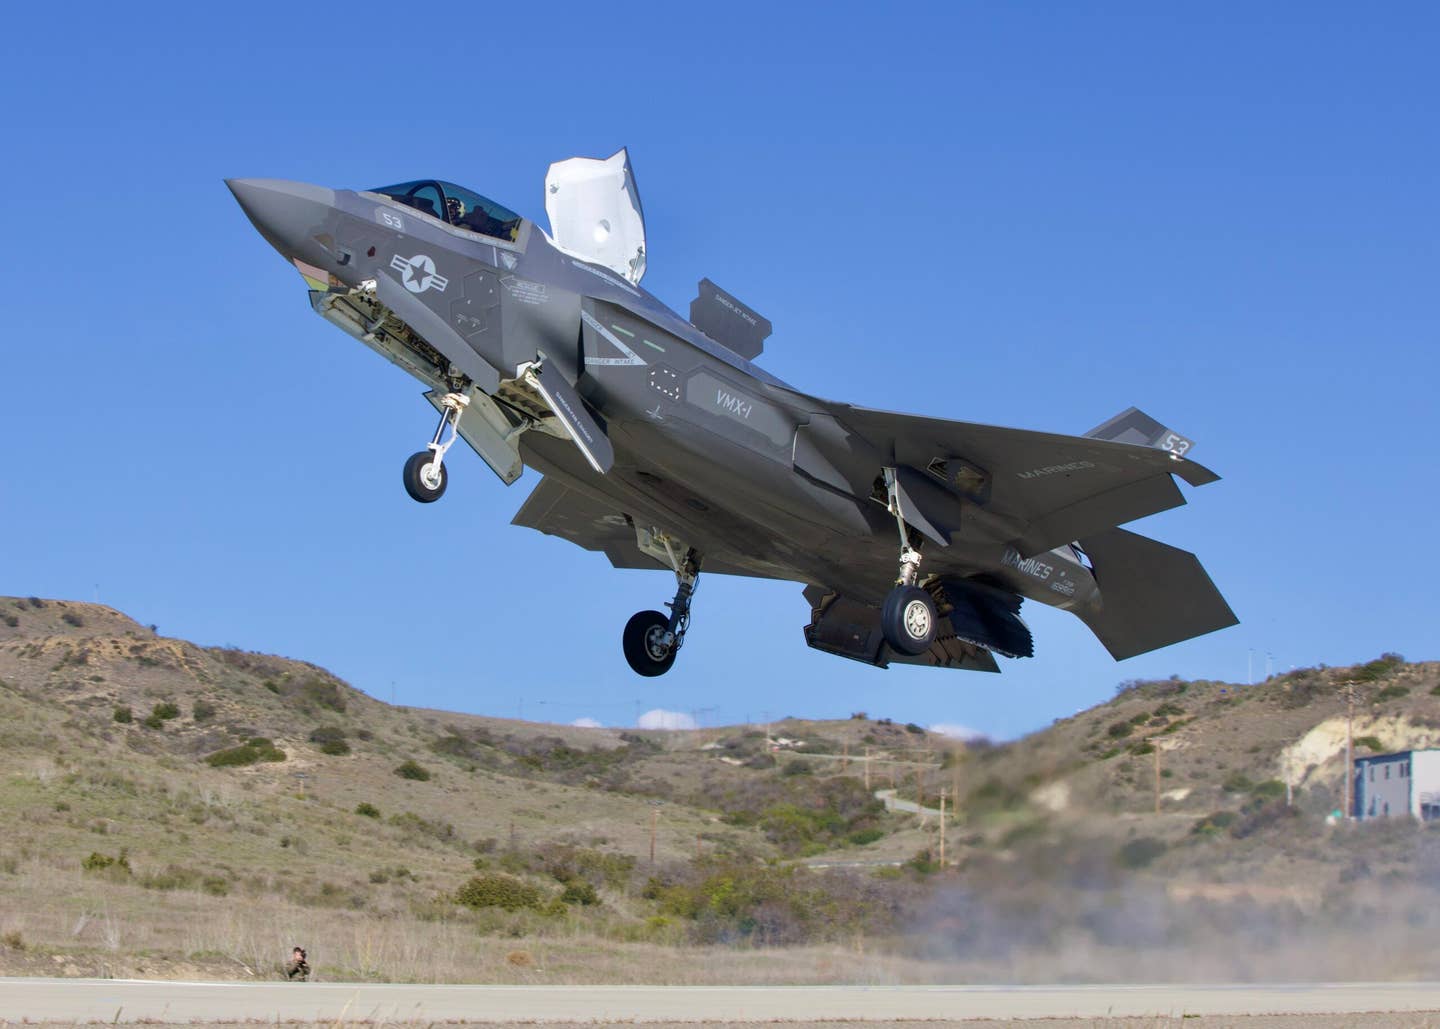 A VMX-1 F-35B takes off from a short strip during austere operations testing. (Author's image)